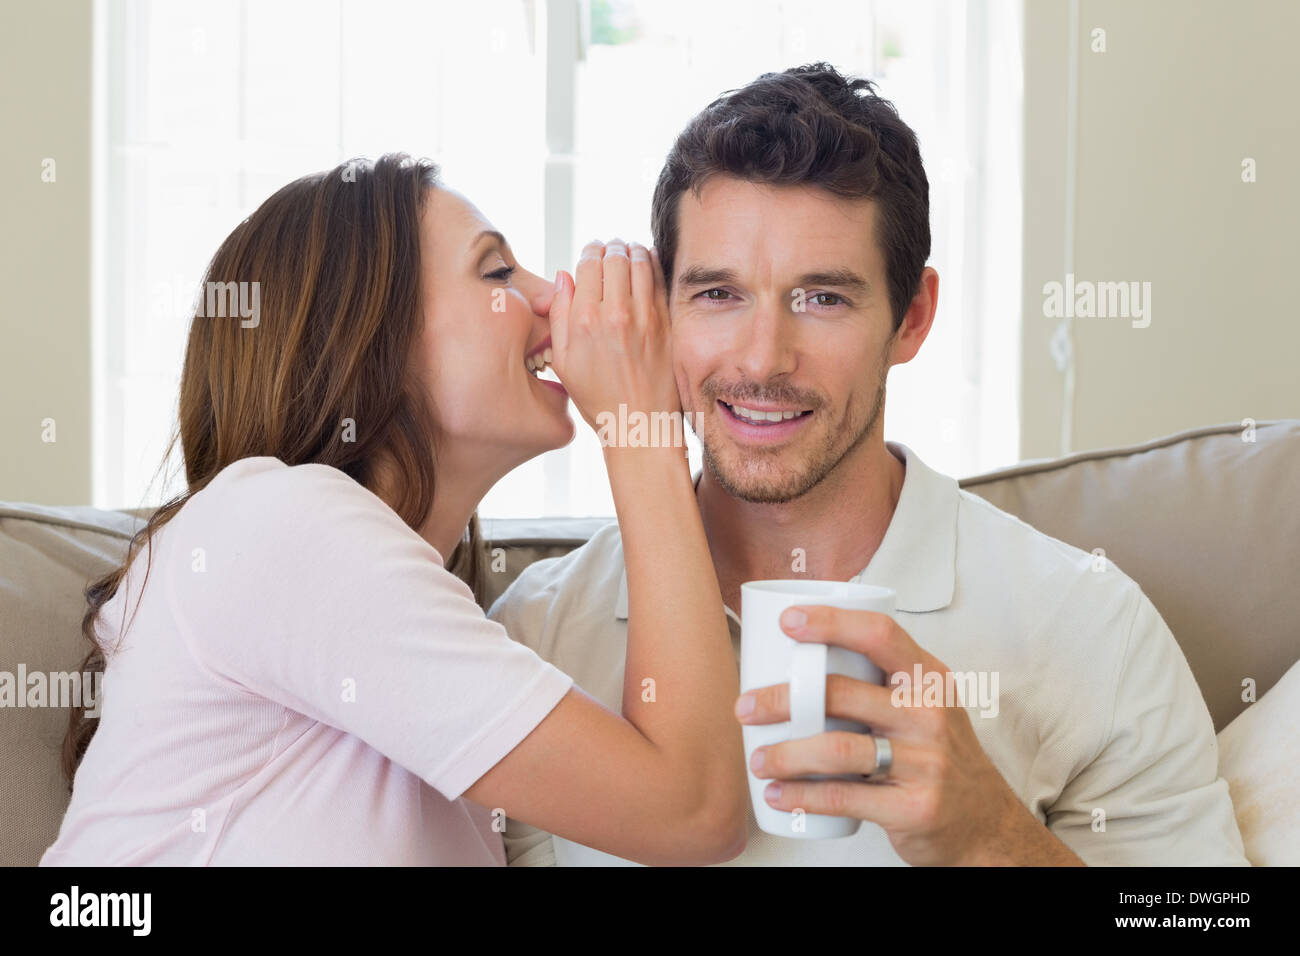 Woman whispering secret into a happy mans ear in living room Stock Photo